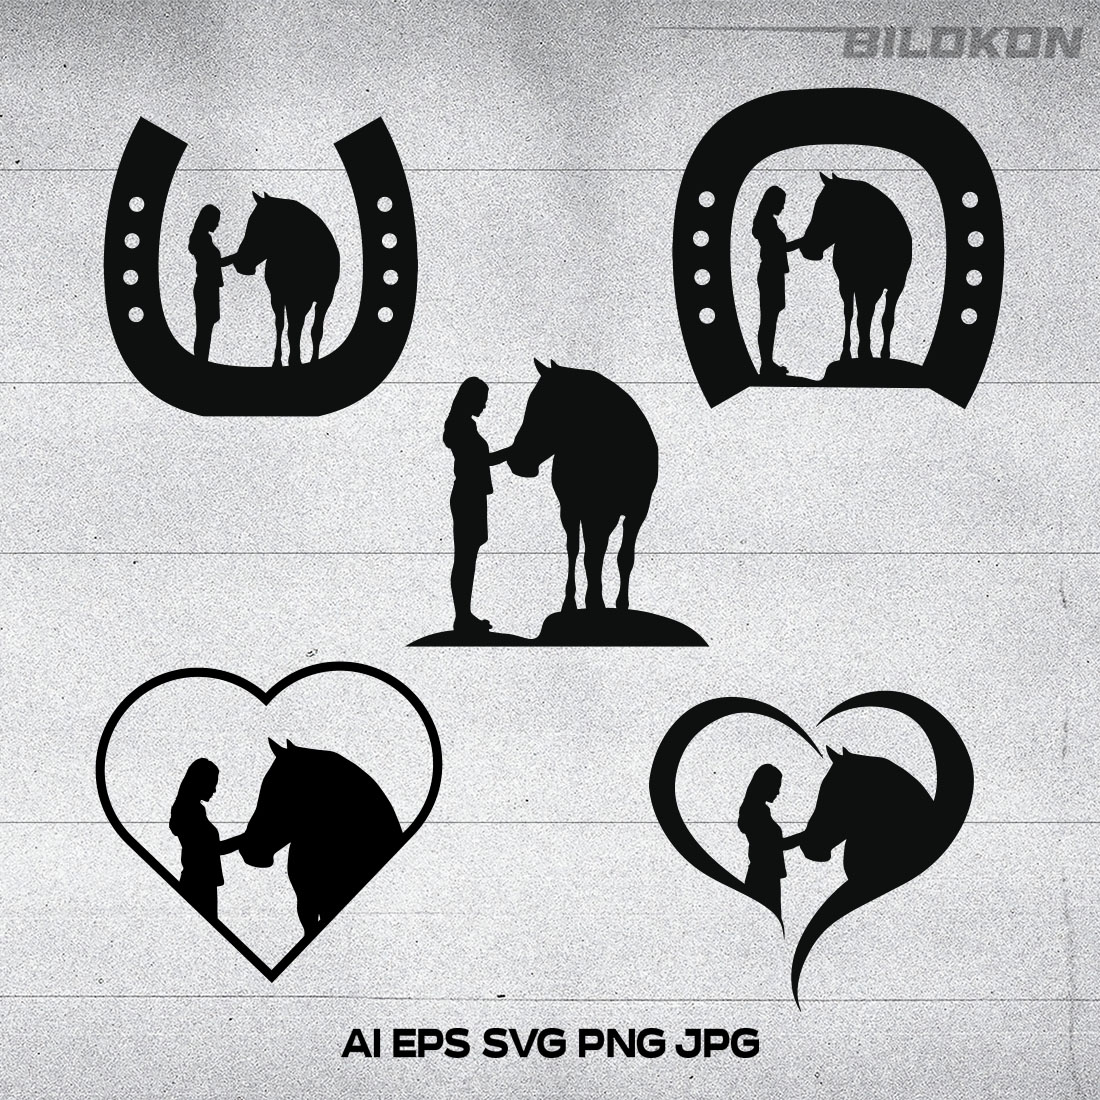 The silhouettes of people and horses are in the shape of hearts.